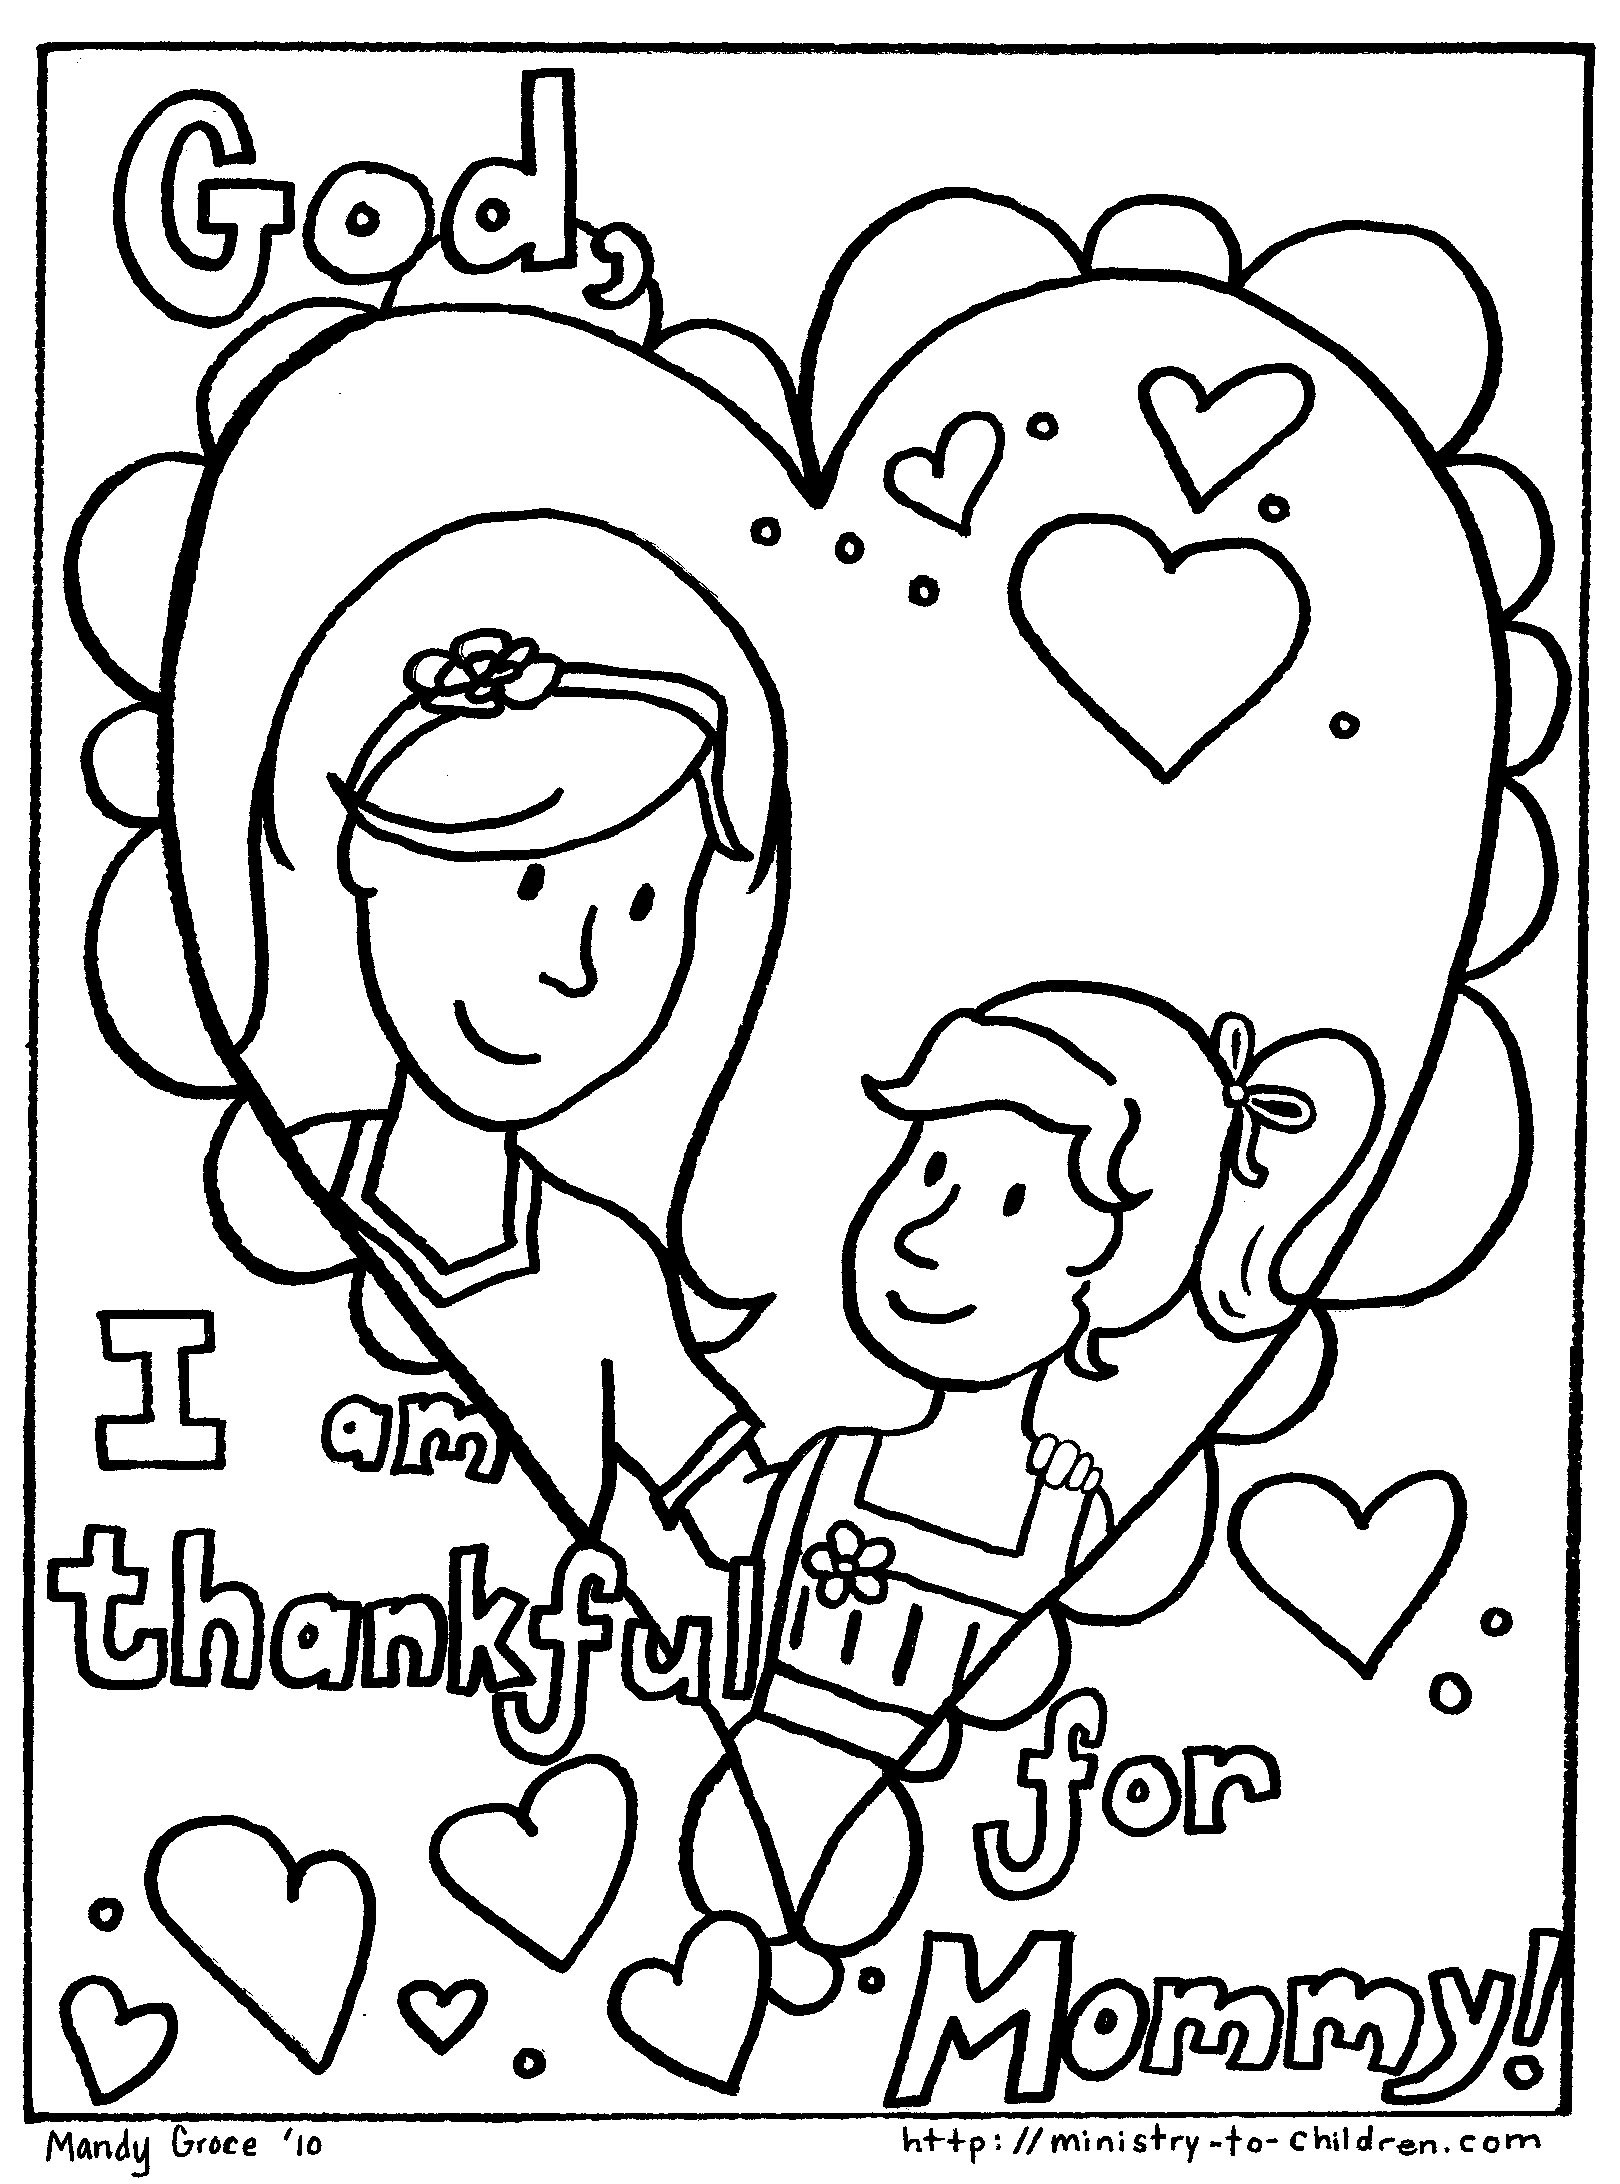 Free Mother's Day Coloring Pages Coloring Pages Printable Mothers Dayring Pages Free Mother S